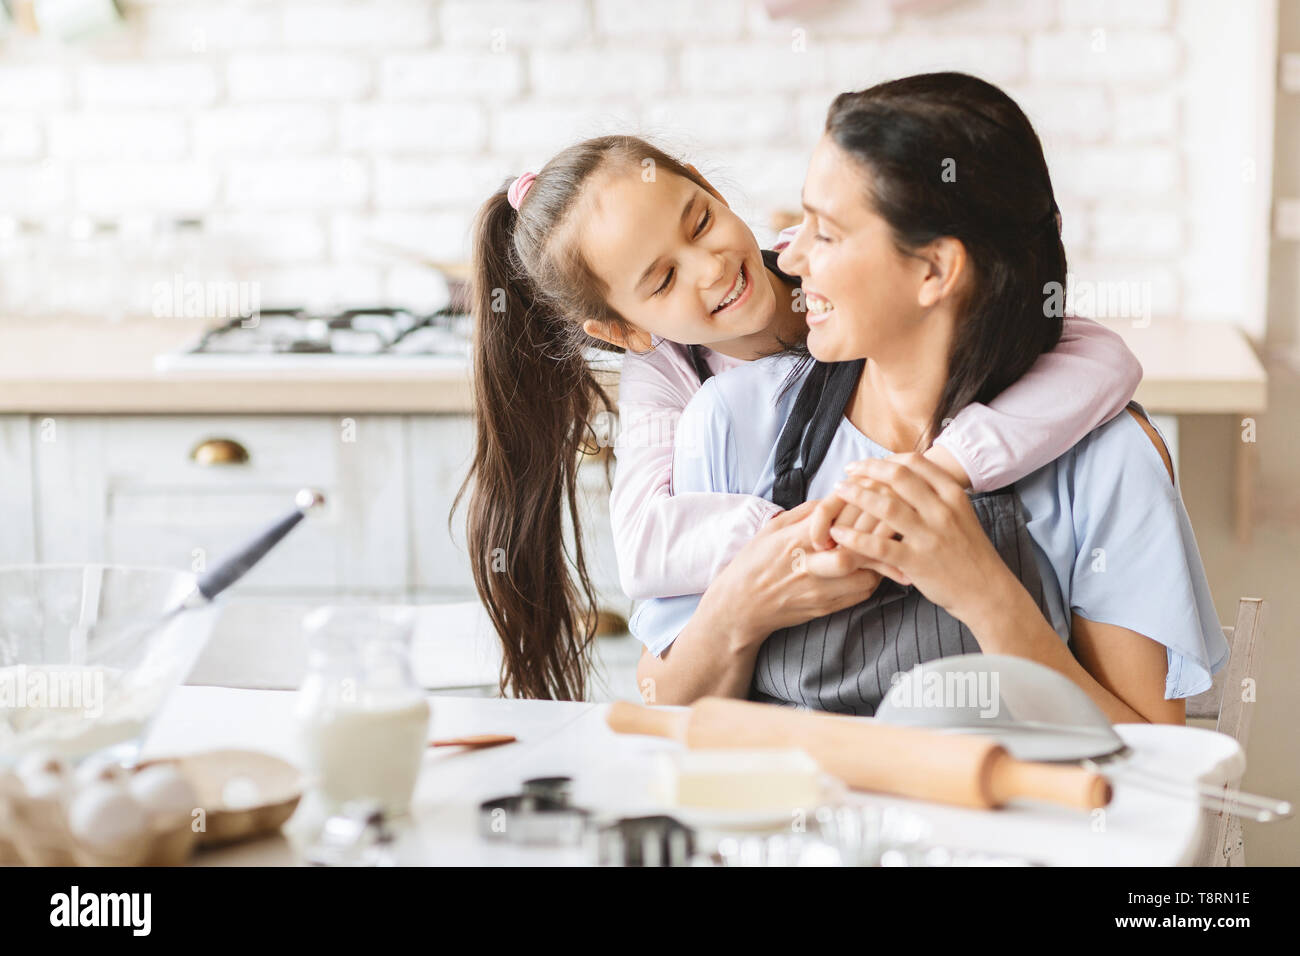 Loving daughter hugging her mother on kitchen. Stock Photo